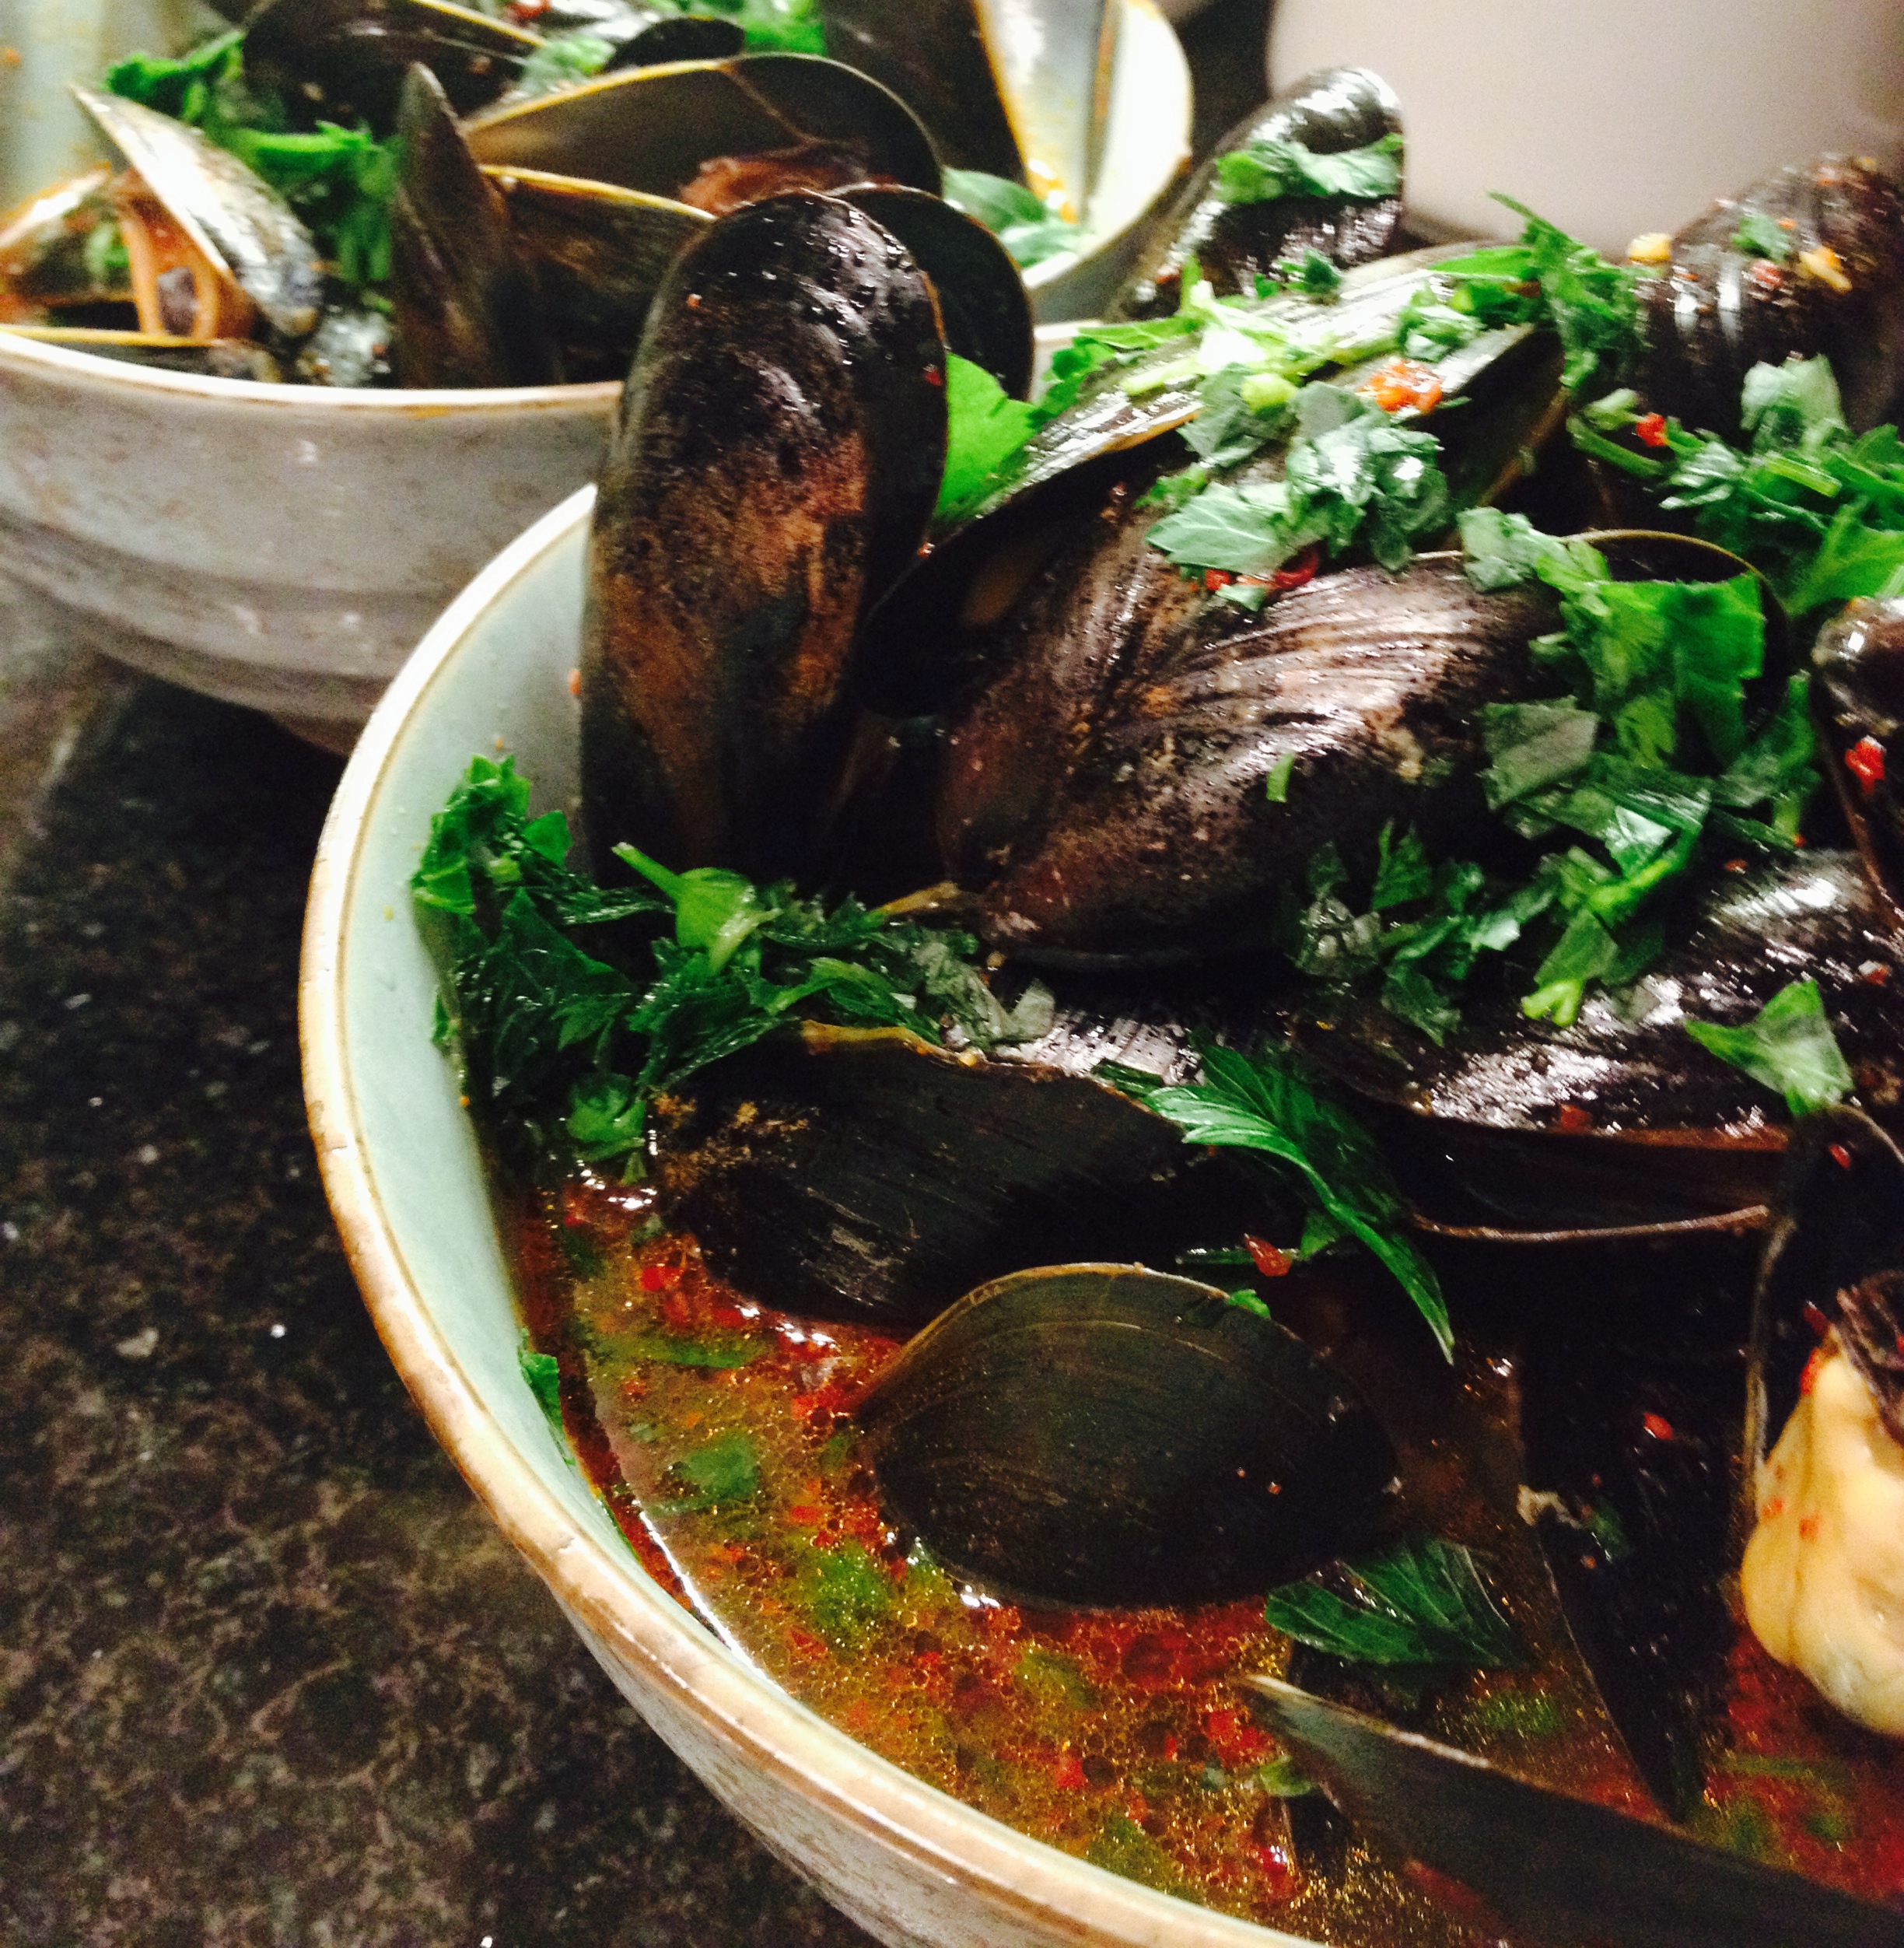 korean-style mussels in spicy broth.. :: by radish*rose